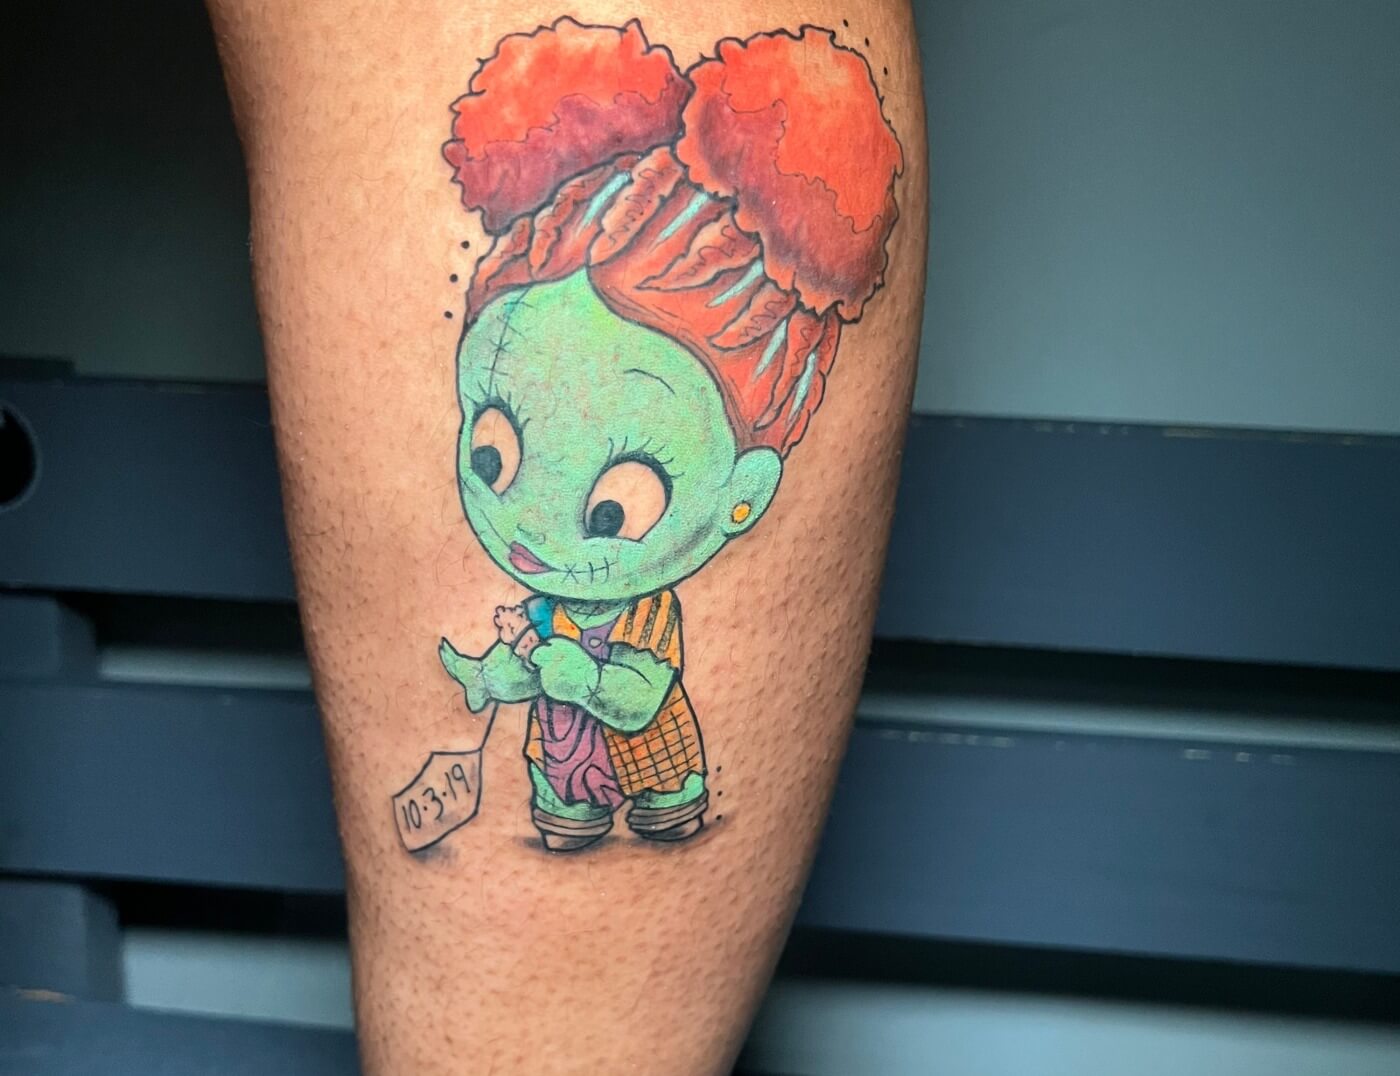 Baby Sally "Nightmare Before Christmas" Tattoo By Funk Tha World At Iron Palm Tattoos. This tattoo was requested by and inked for @_mi.ch.ele_ as a gift for her daughter. Call 404-973-7828 or stop by for a free consultation with Funk on your next tattoo. Walk Ins are welcome.